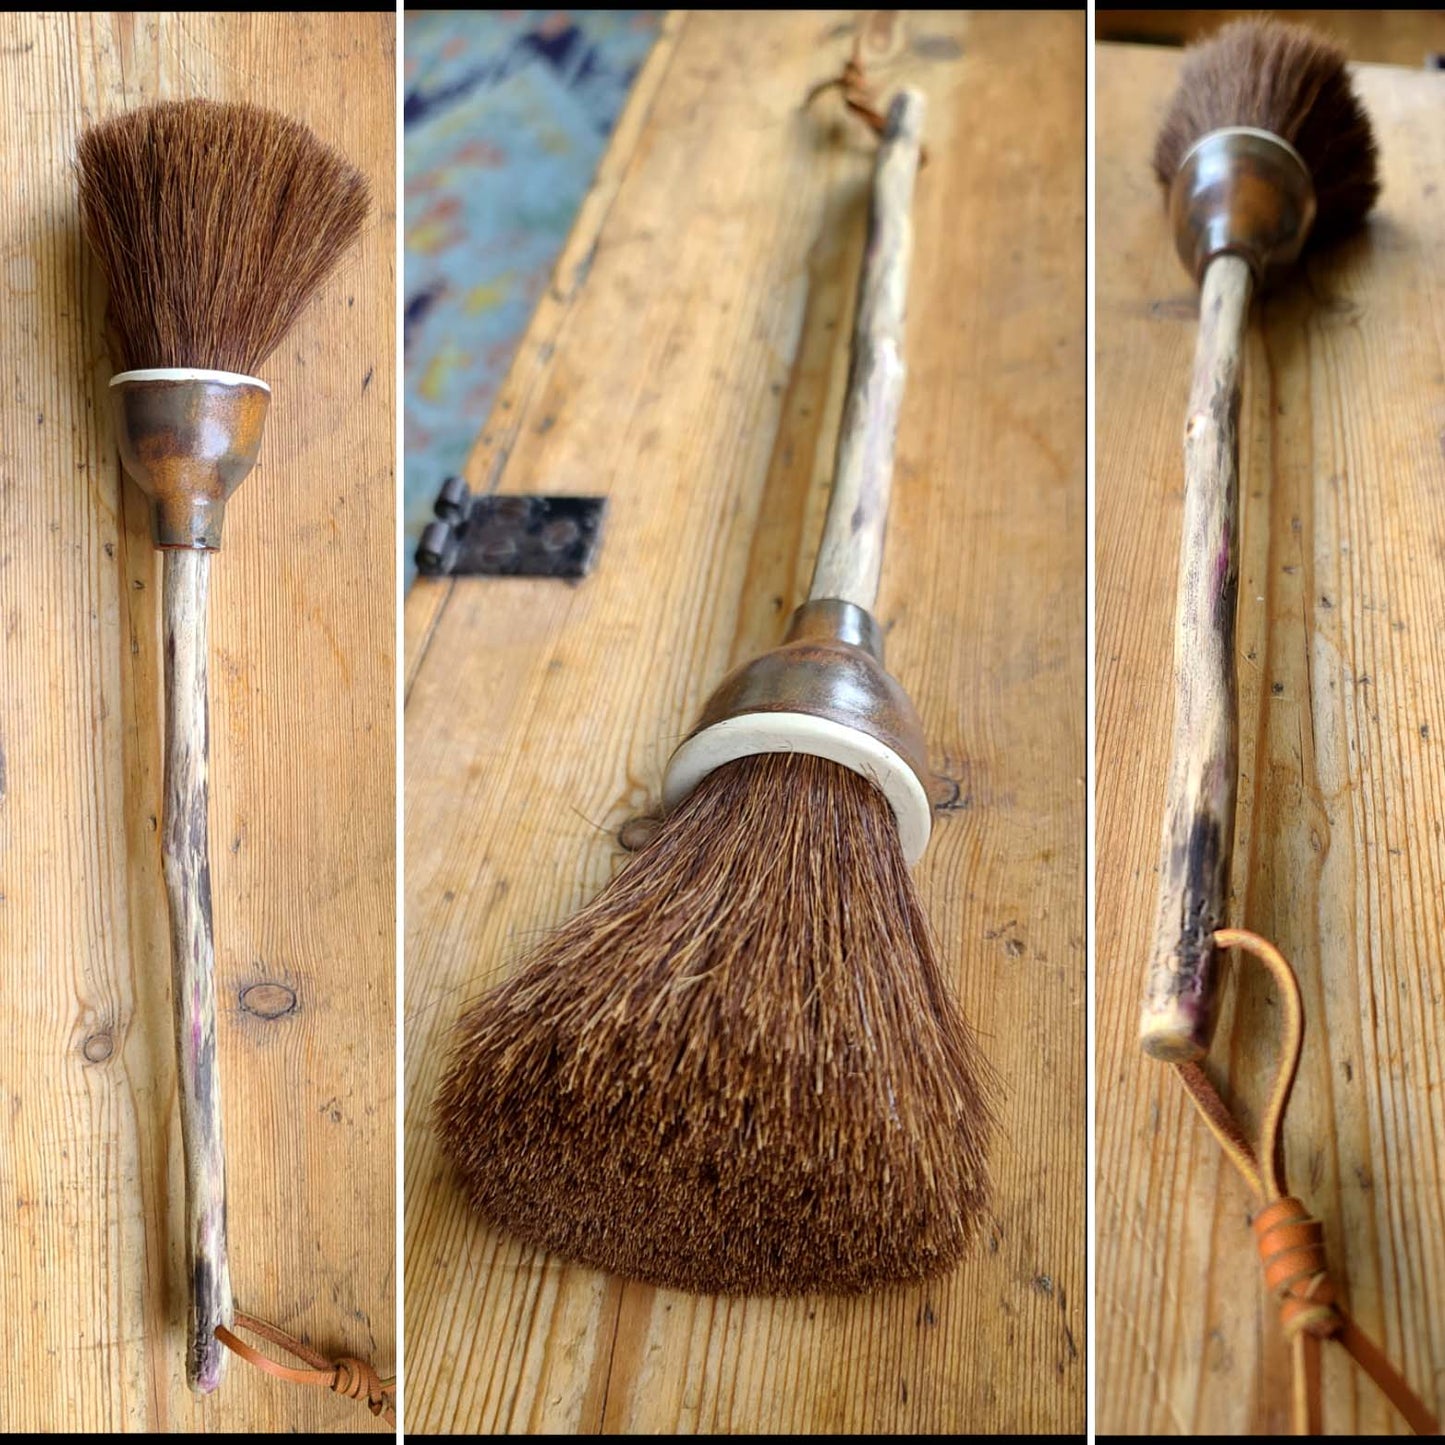 2 antique horse hair? brushes. Wood handles. Nice ones. Primitive